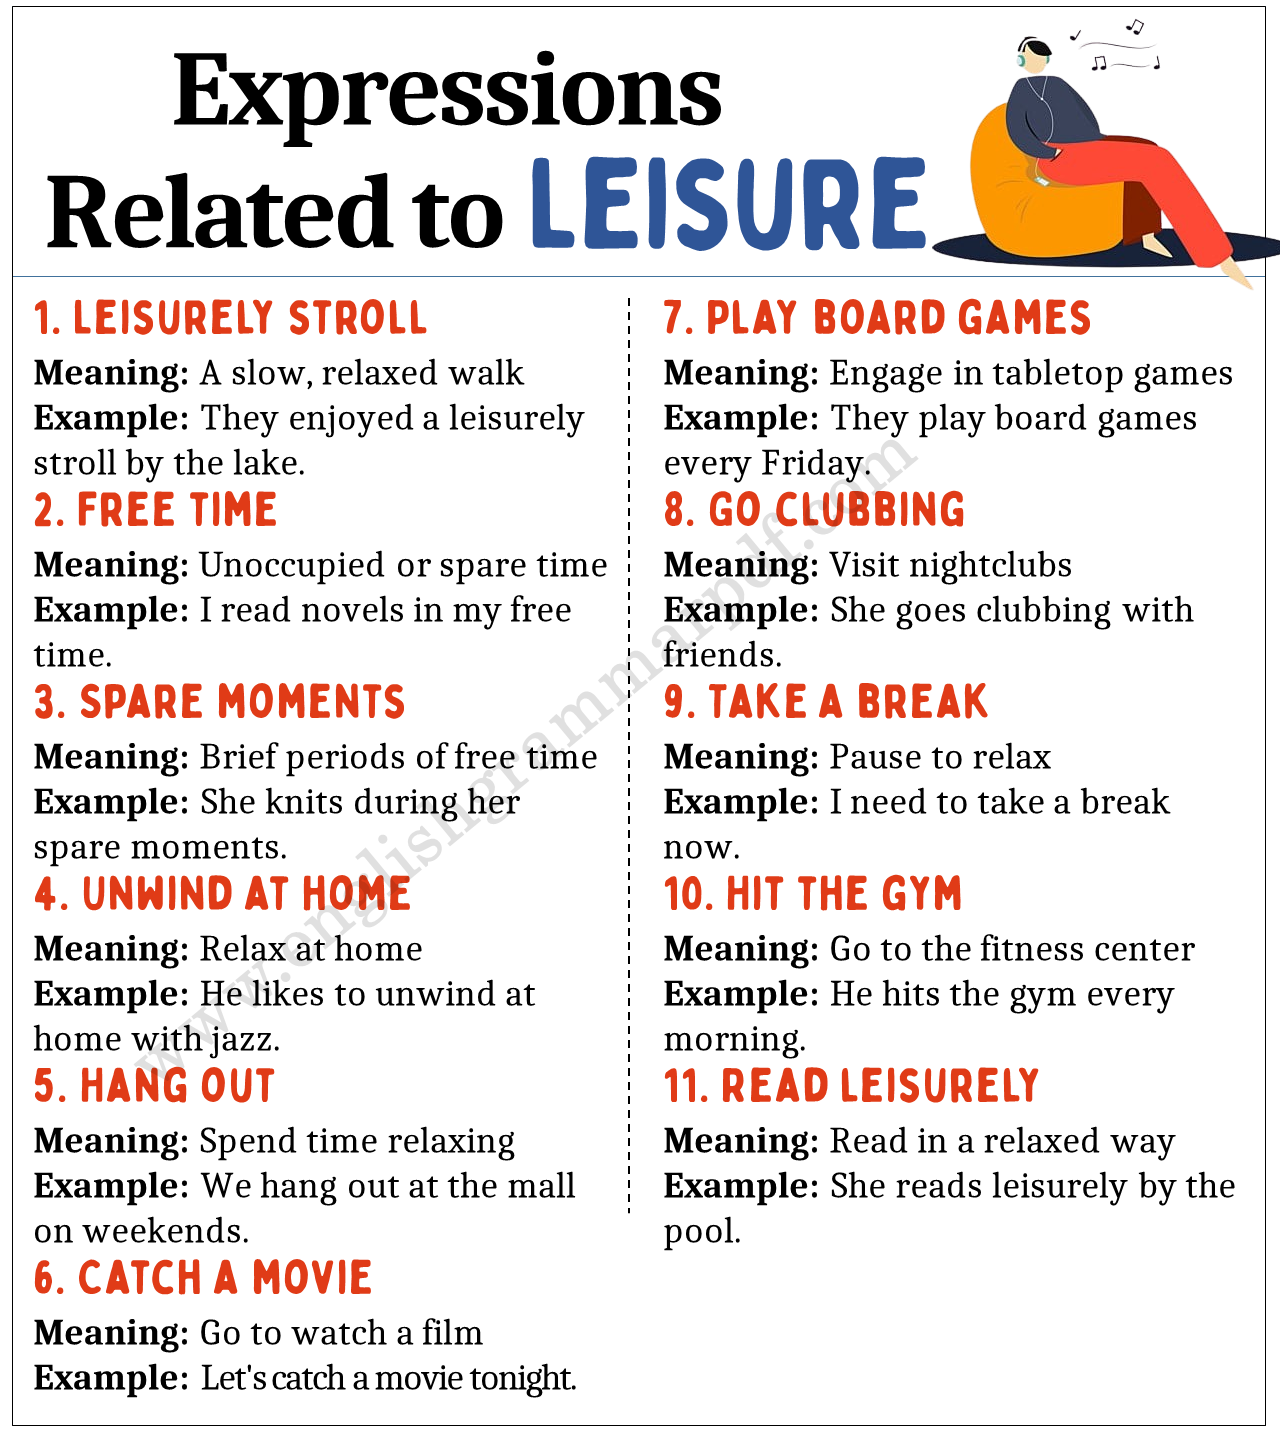 Expressions Related to Leisure